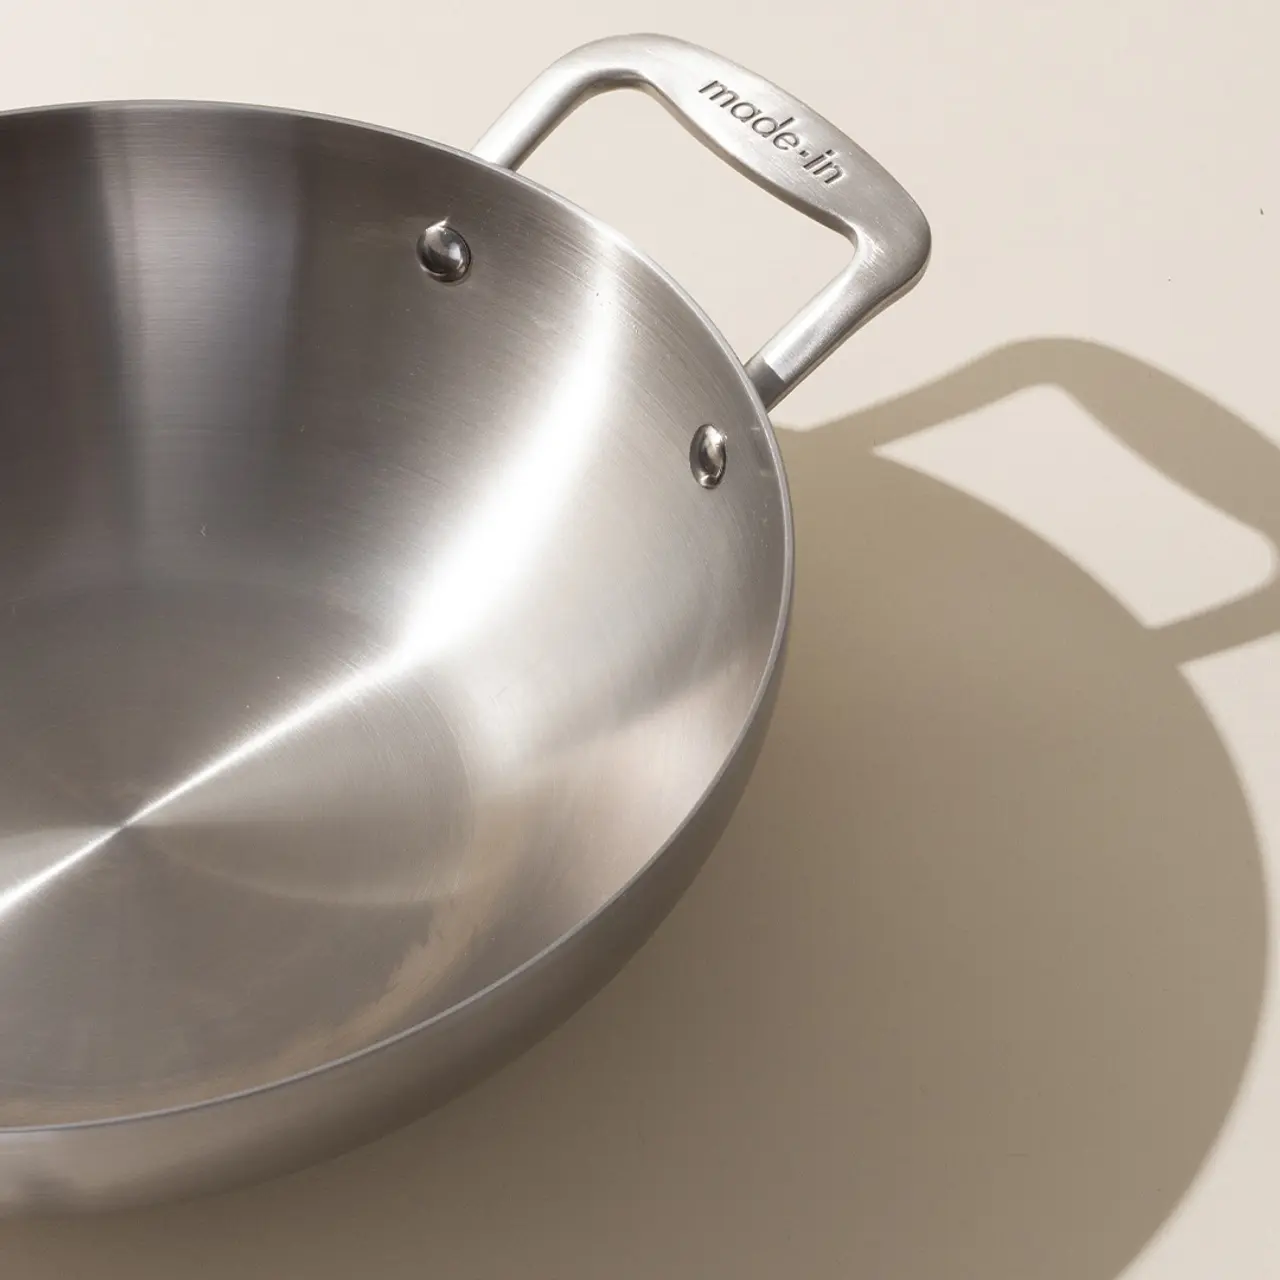 A stainless steel frying pan with the brand name 'made in' on the handle, casting a shadow on a light surface.